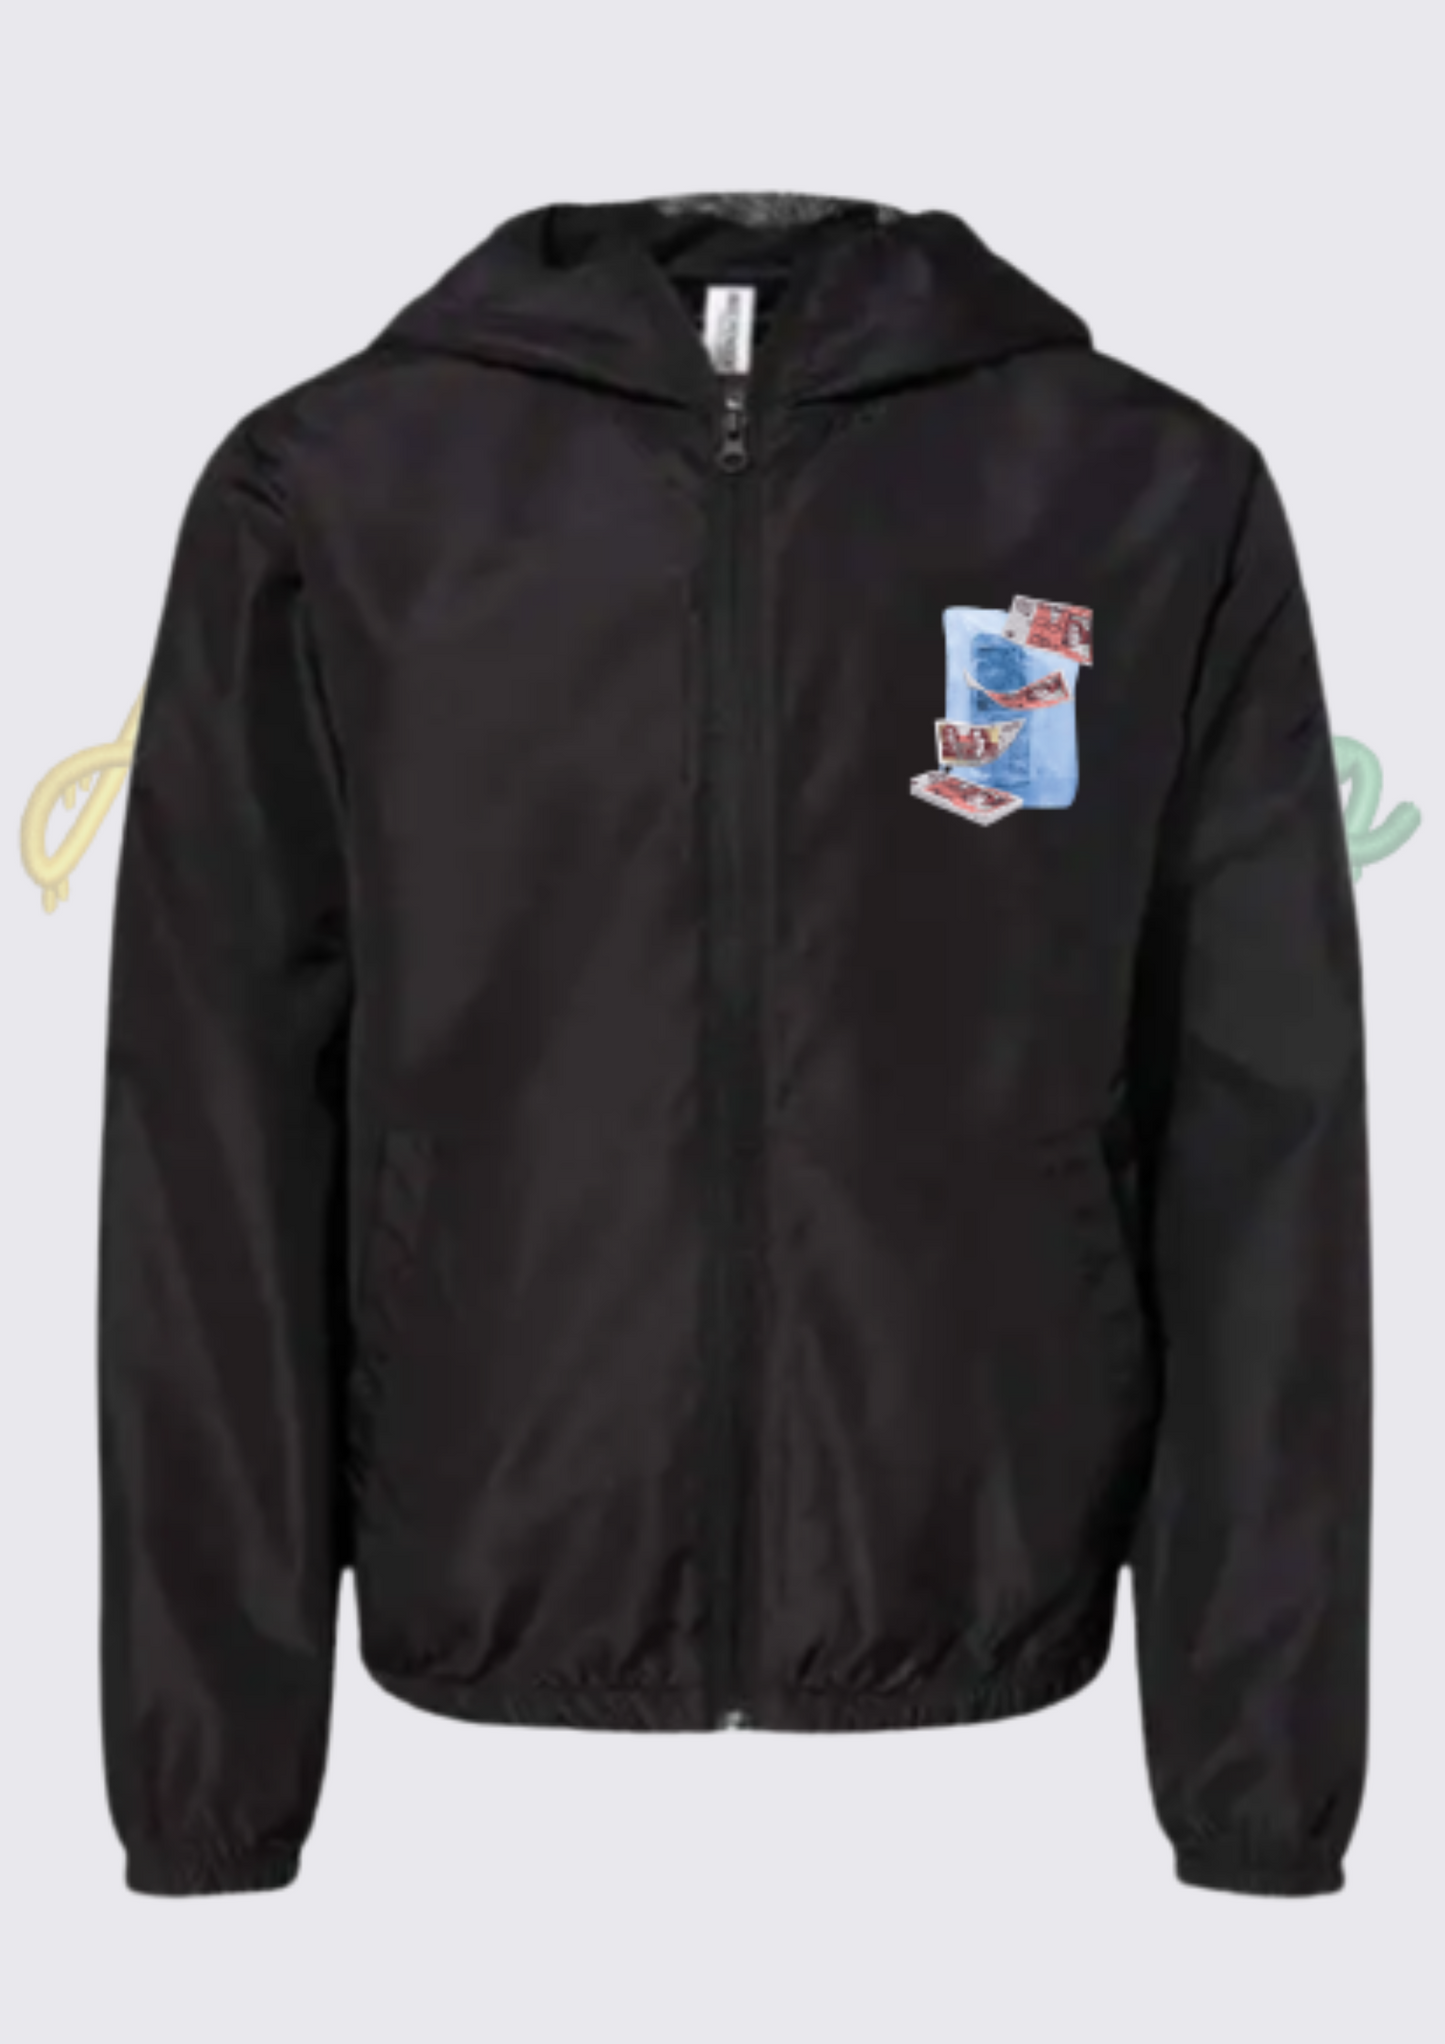 Hunnas Onto Thousands - Official “£50 Notes” Windbreaker Jacket